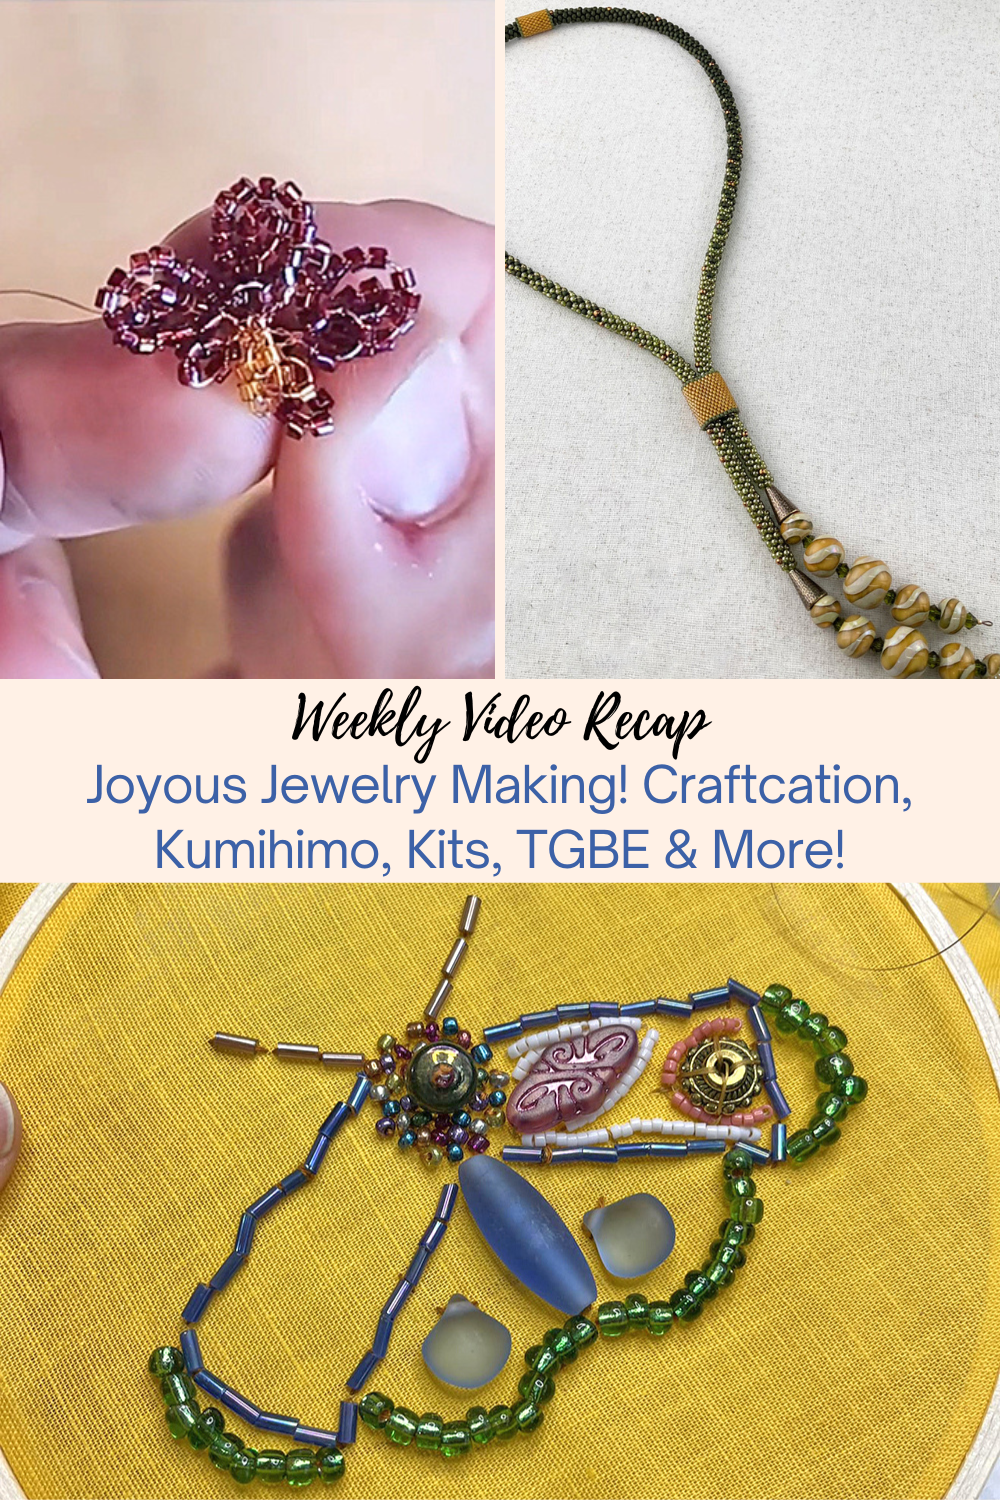 Joyous Jewelry Making! Craftcation, Kumihimo, Kits, TGBE & More! Collage